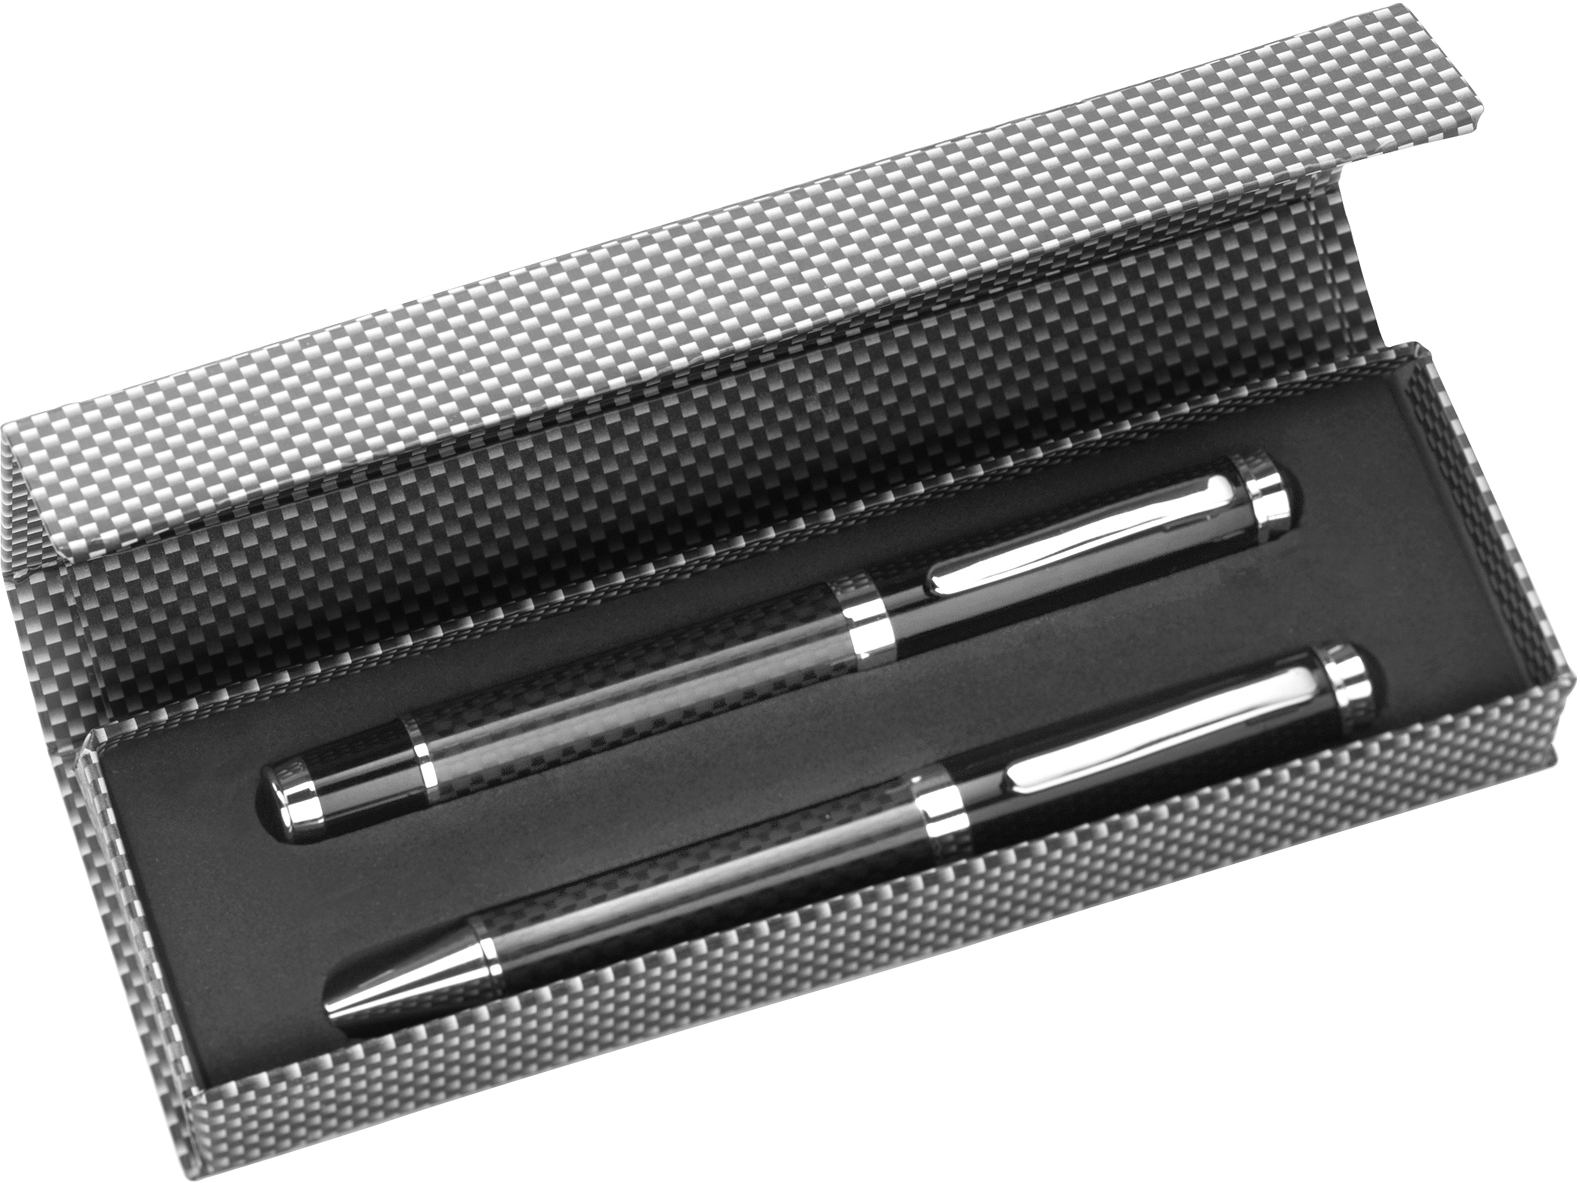 Classic pen set consisting of a metal ballpen and rollerball with black ink